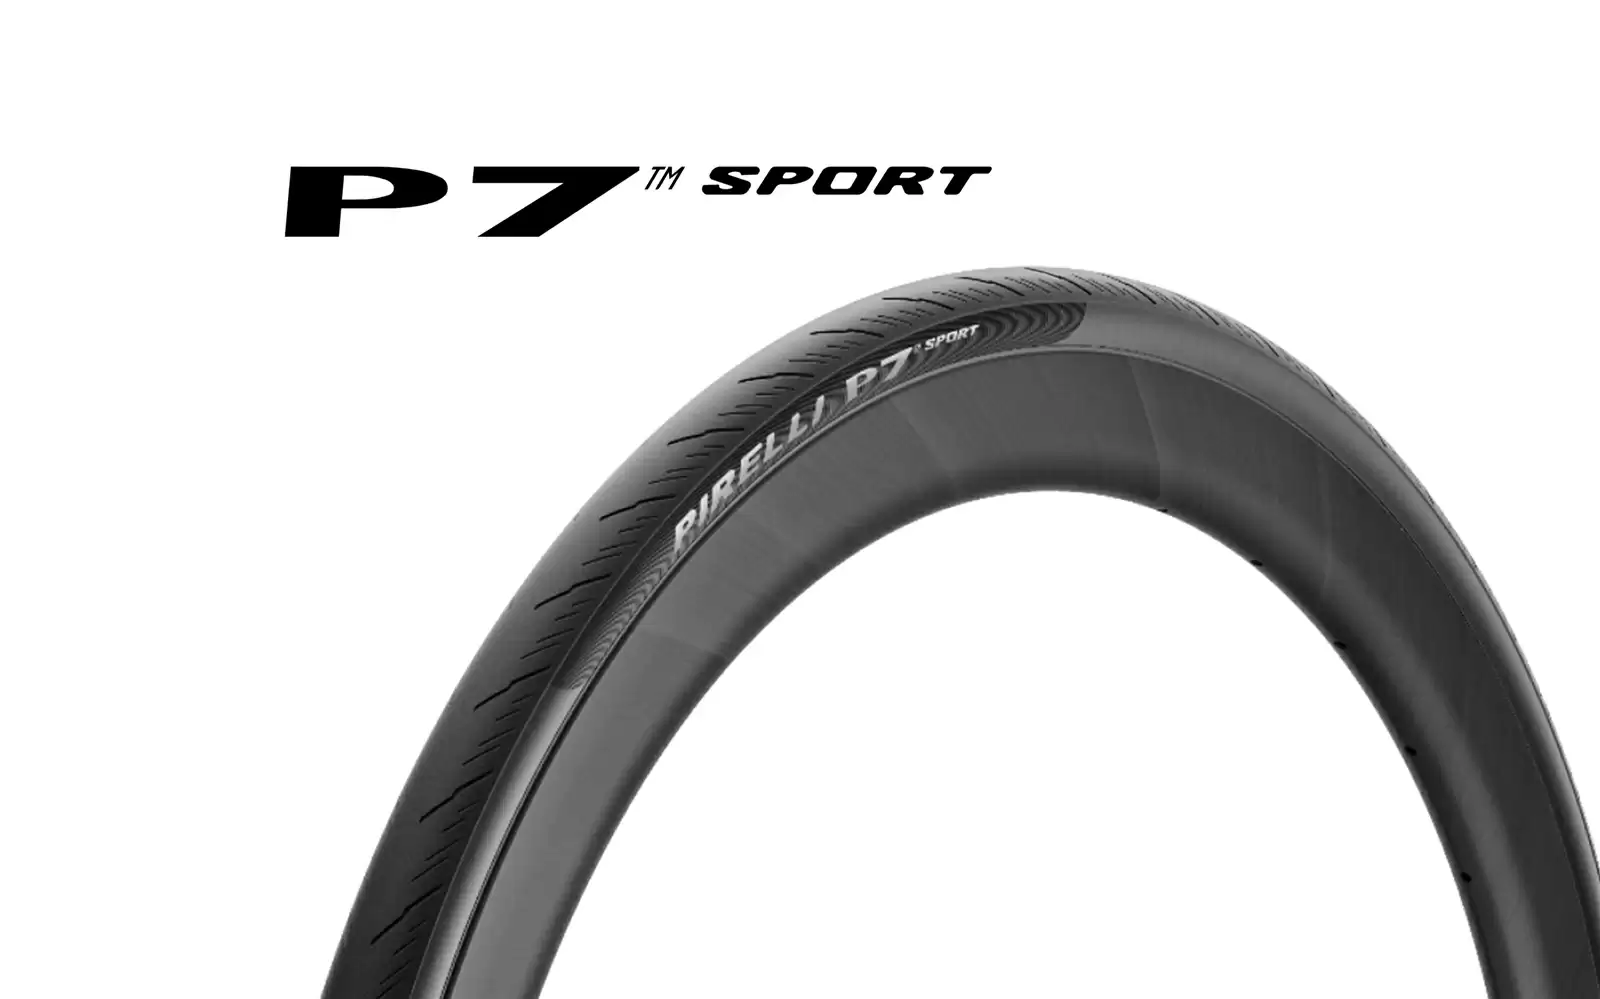 Discover P7™ Sport , the new Pirelli's tires for all-round use - image